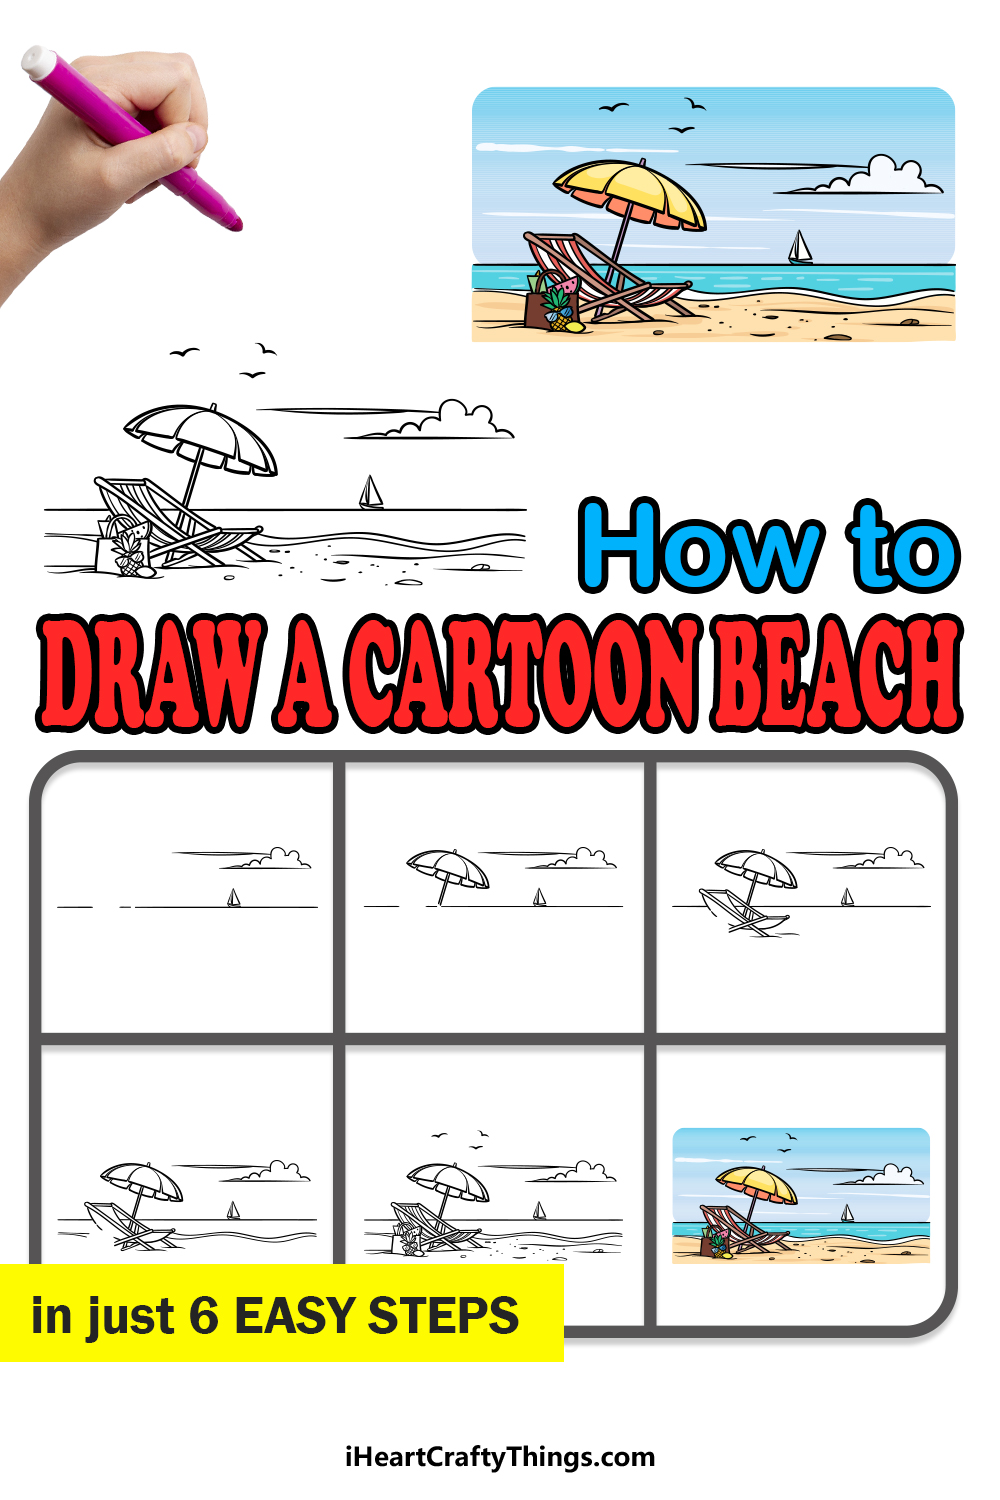 how to draw a cartoon beach in 6 easy steps